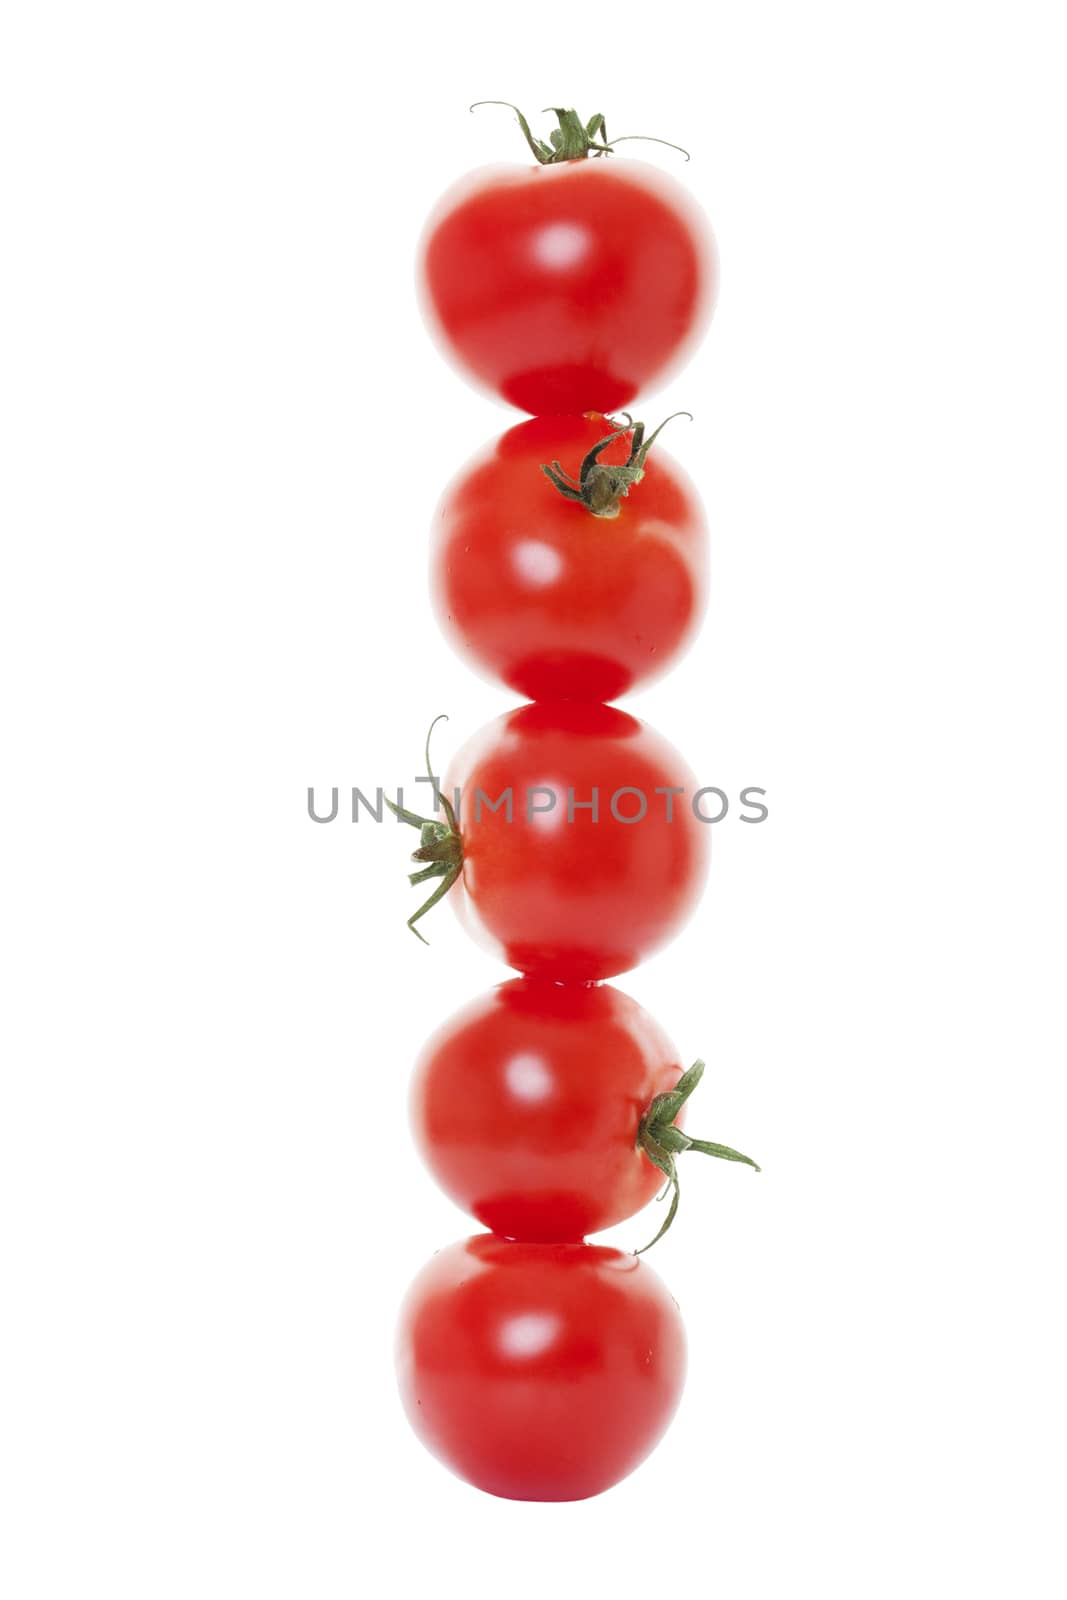 Five tomatoes stacked on white background.